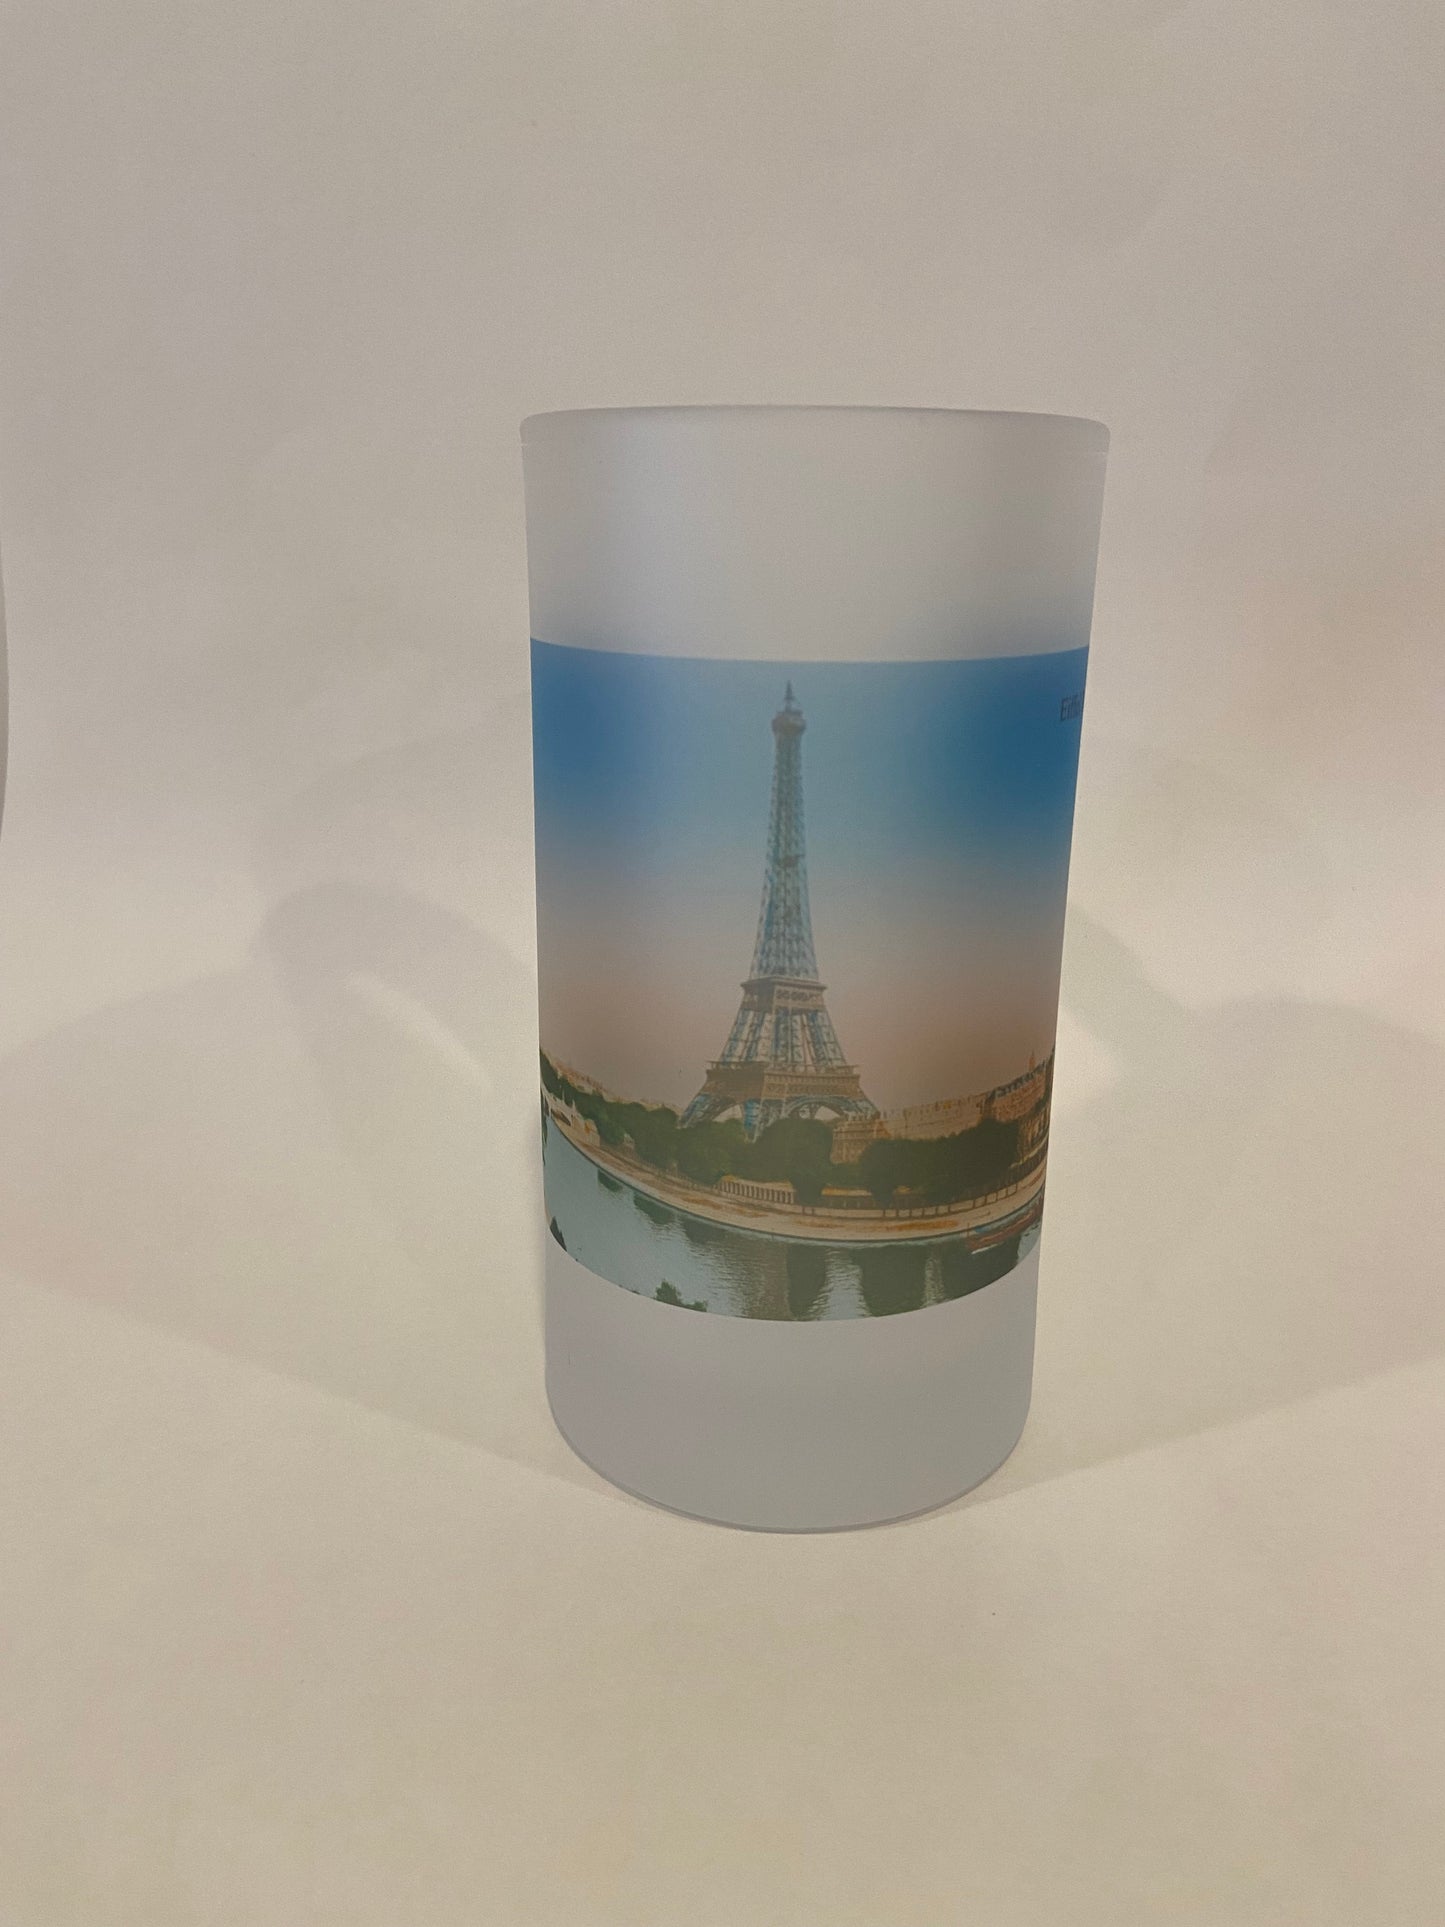 Colorful Frosted Glass Beer Mug of The Eiffel Tower